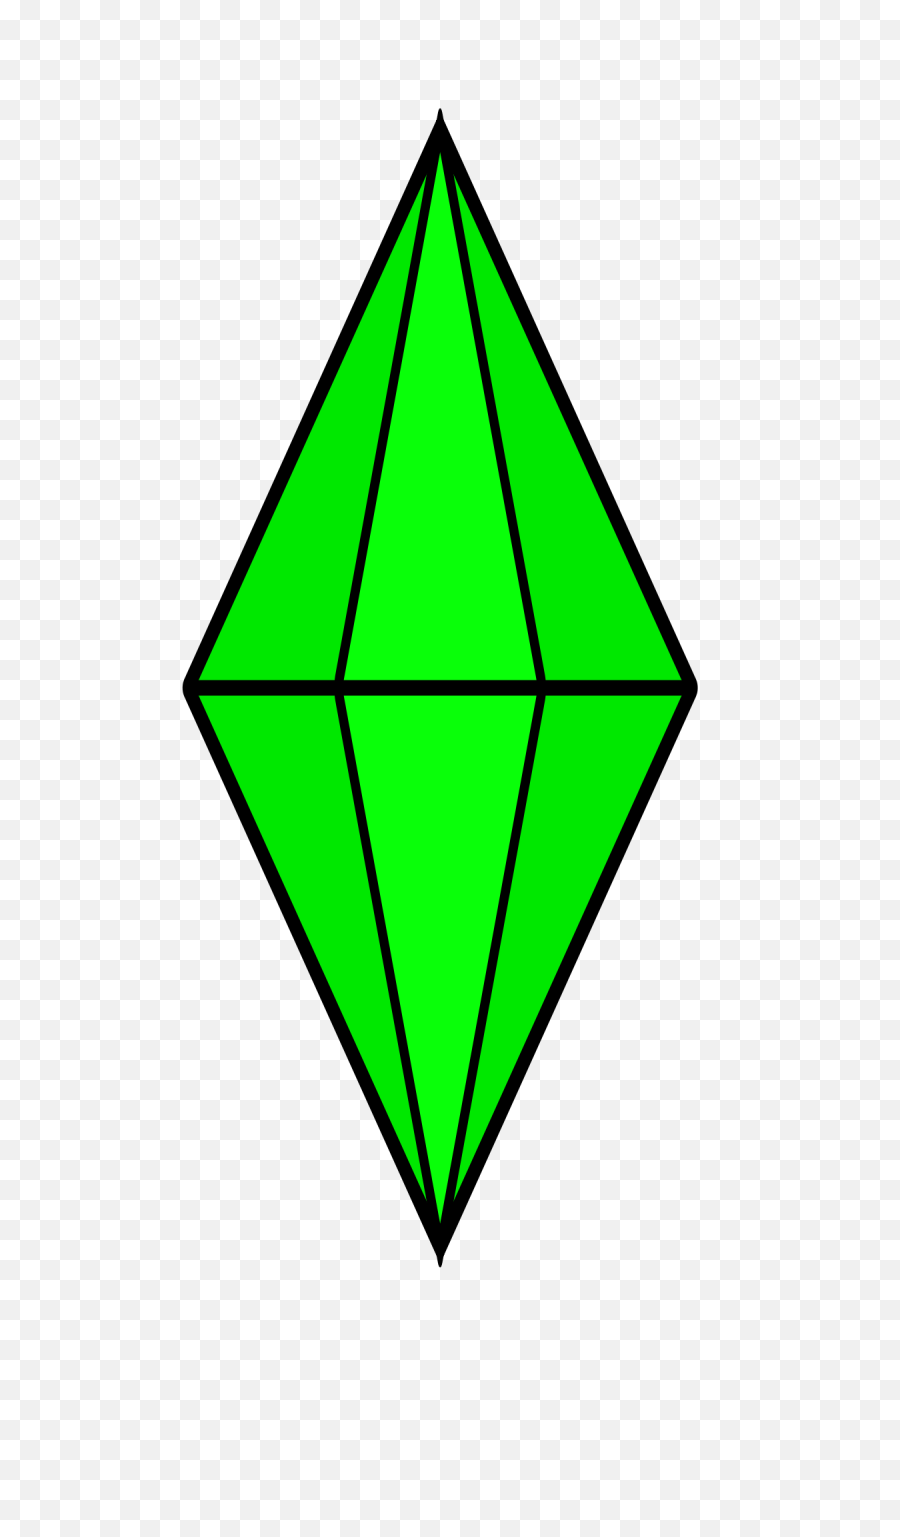 Sims Diamond Png 3 Image - The Sims,Diamond Outline Png